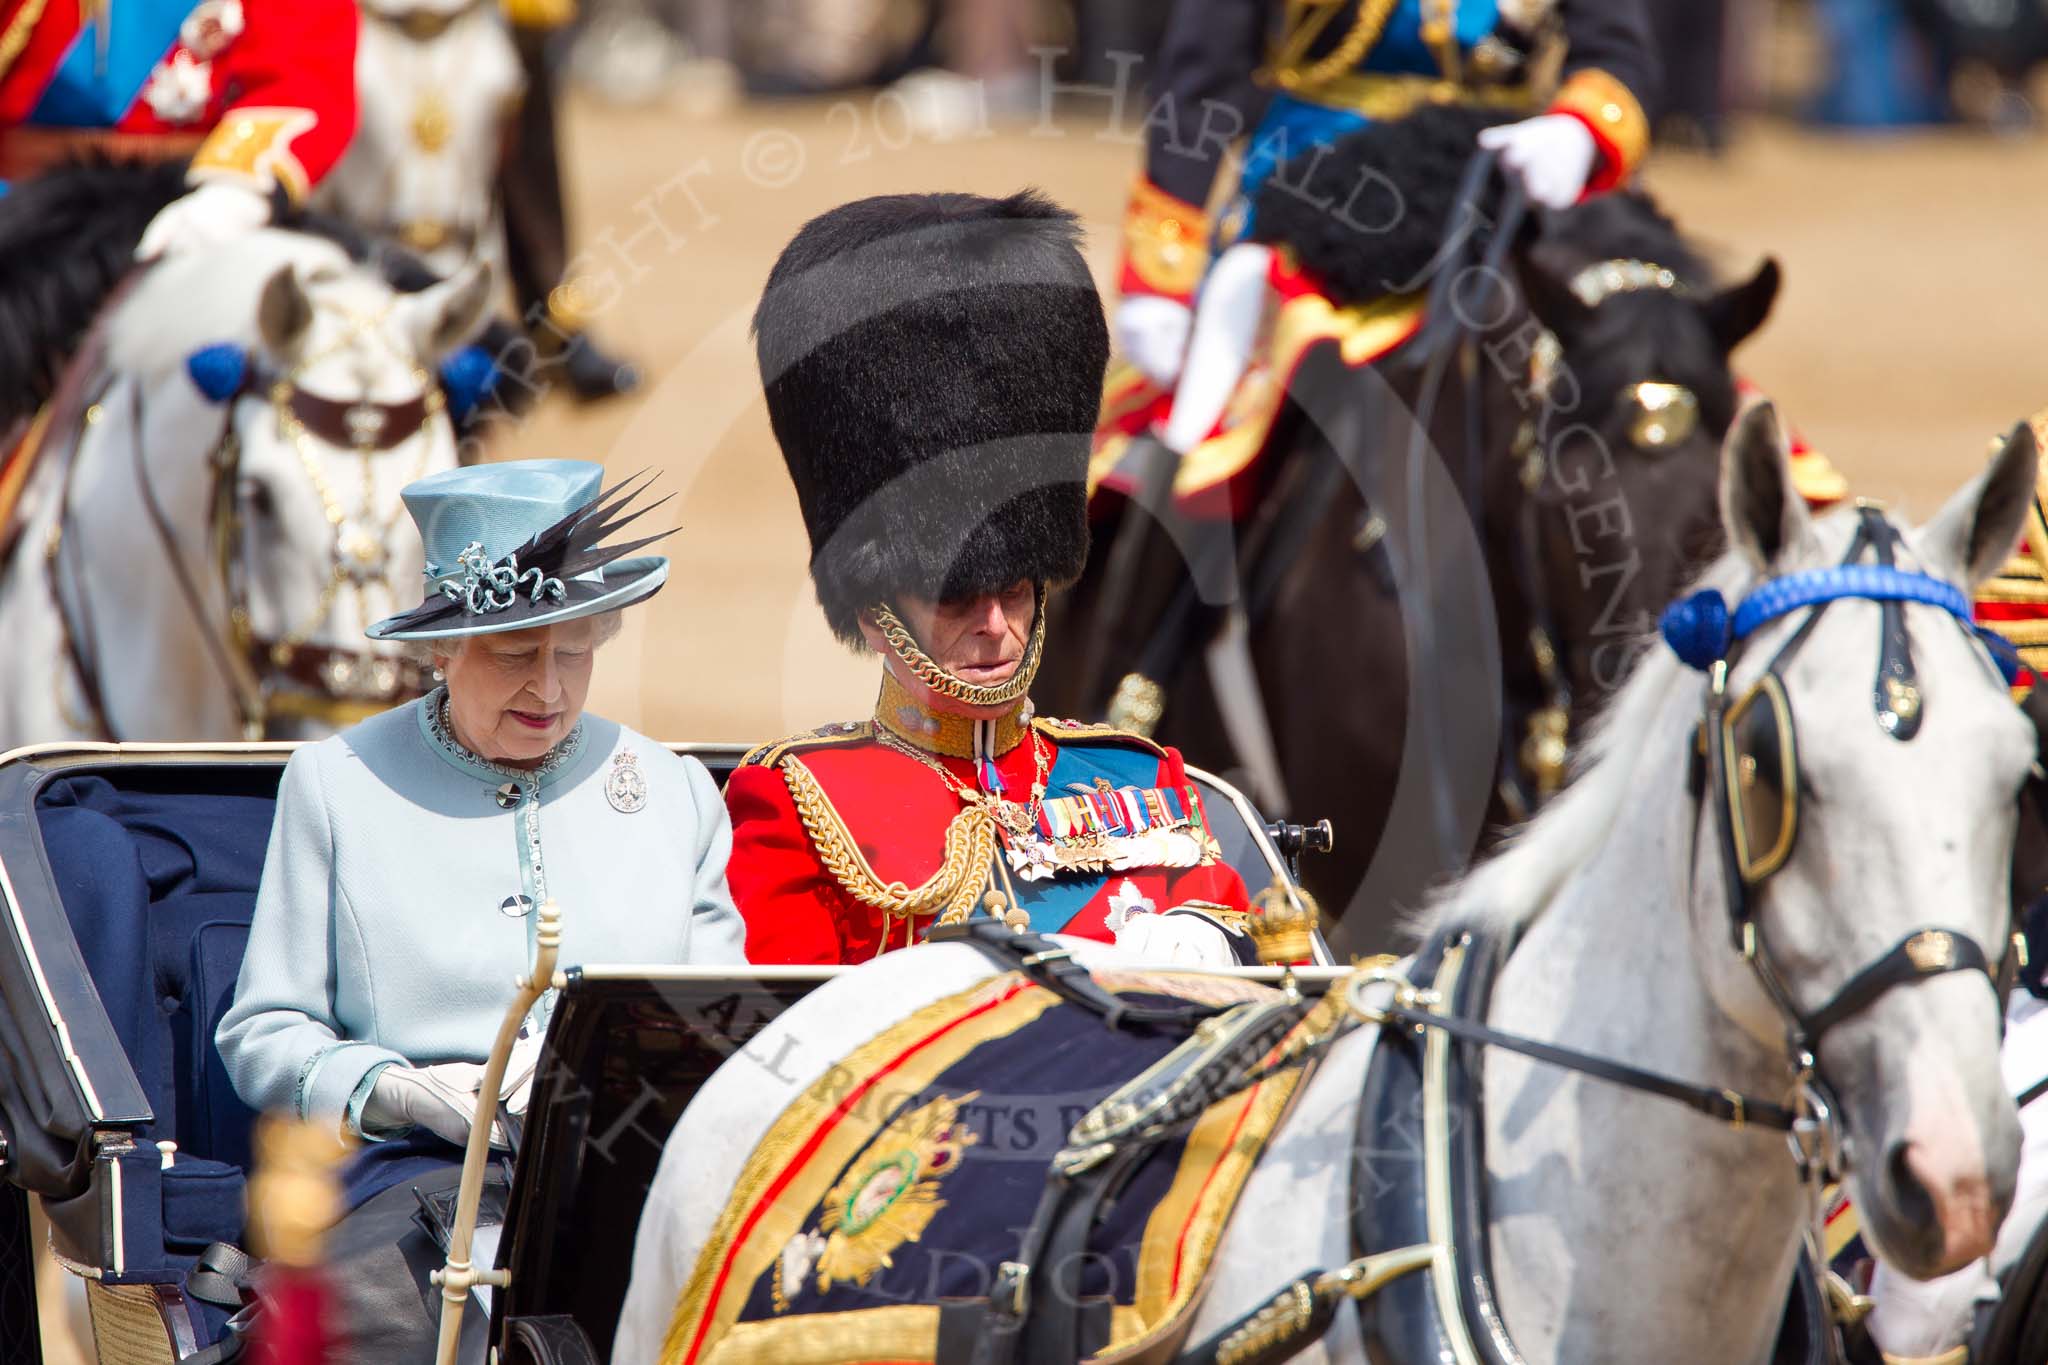 Trooping the Colour 2011: Her Majesty The Queen with Prince Philip in the ivory mounted phaeton, arriving on Horse Guards Parade..
Horse Guards Parade, Westminster,
London SW1,
Greater London,
United Kingdom,
on 11 June 2011 at 10:59, image #127